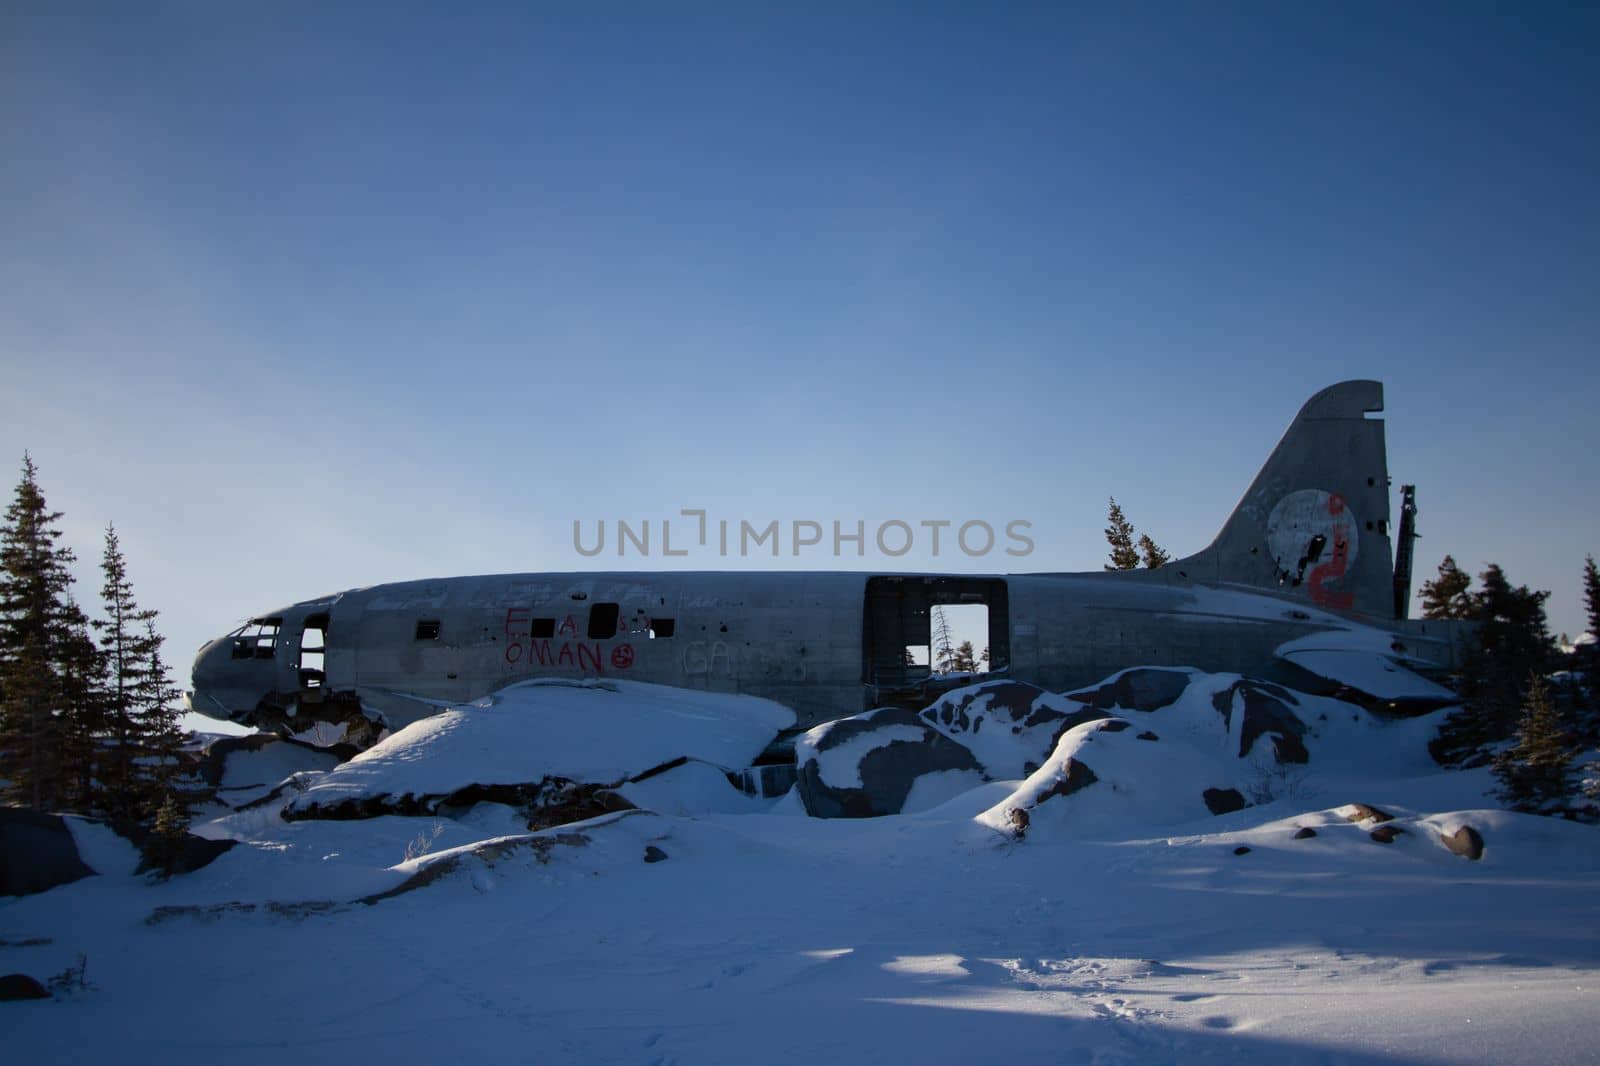 Miss Piggy Plane wreck in Churchill, Manitoba with snow on rocks in front of crash landing site by Granchinho